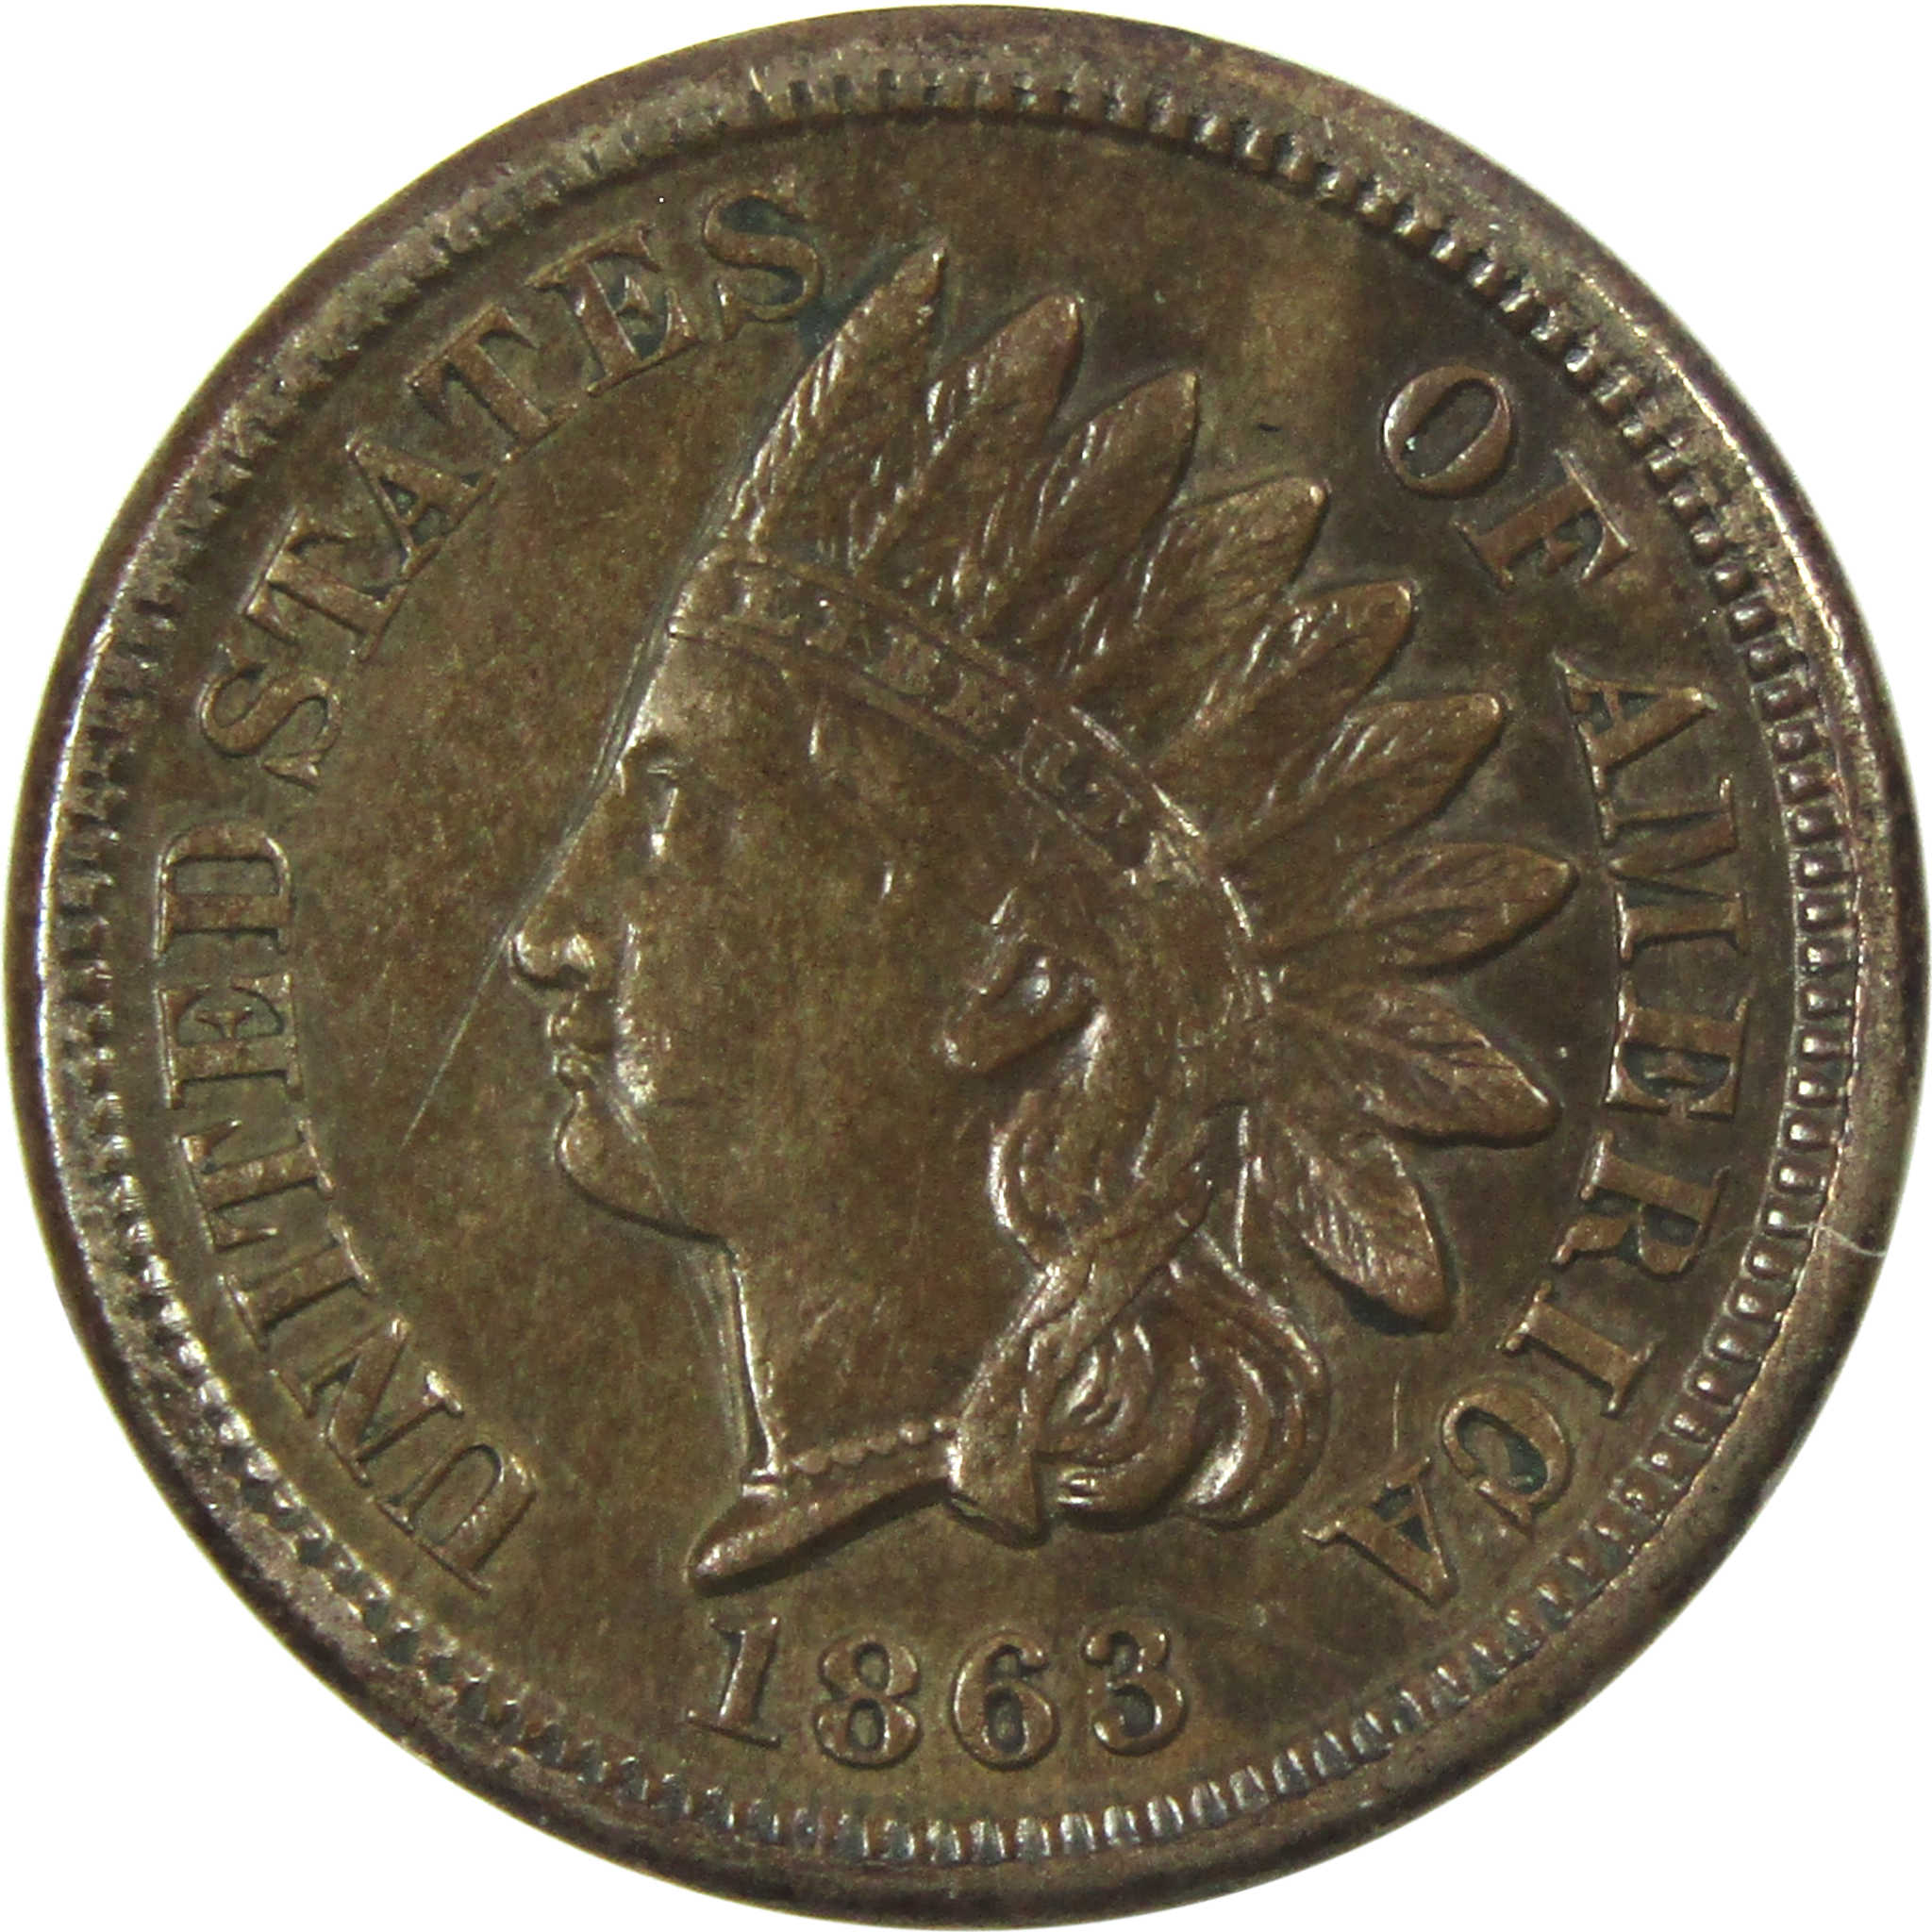 1863 Indian Head Cent XF EF Extremely Fine Copper-Nickel SKU:I13979